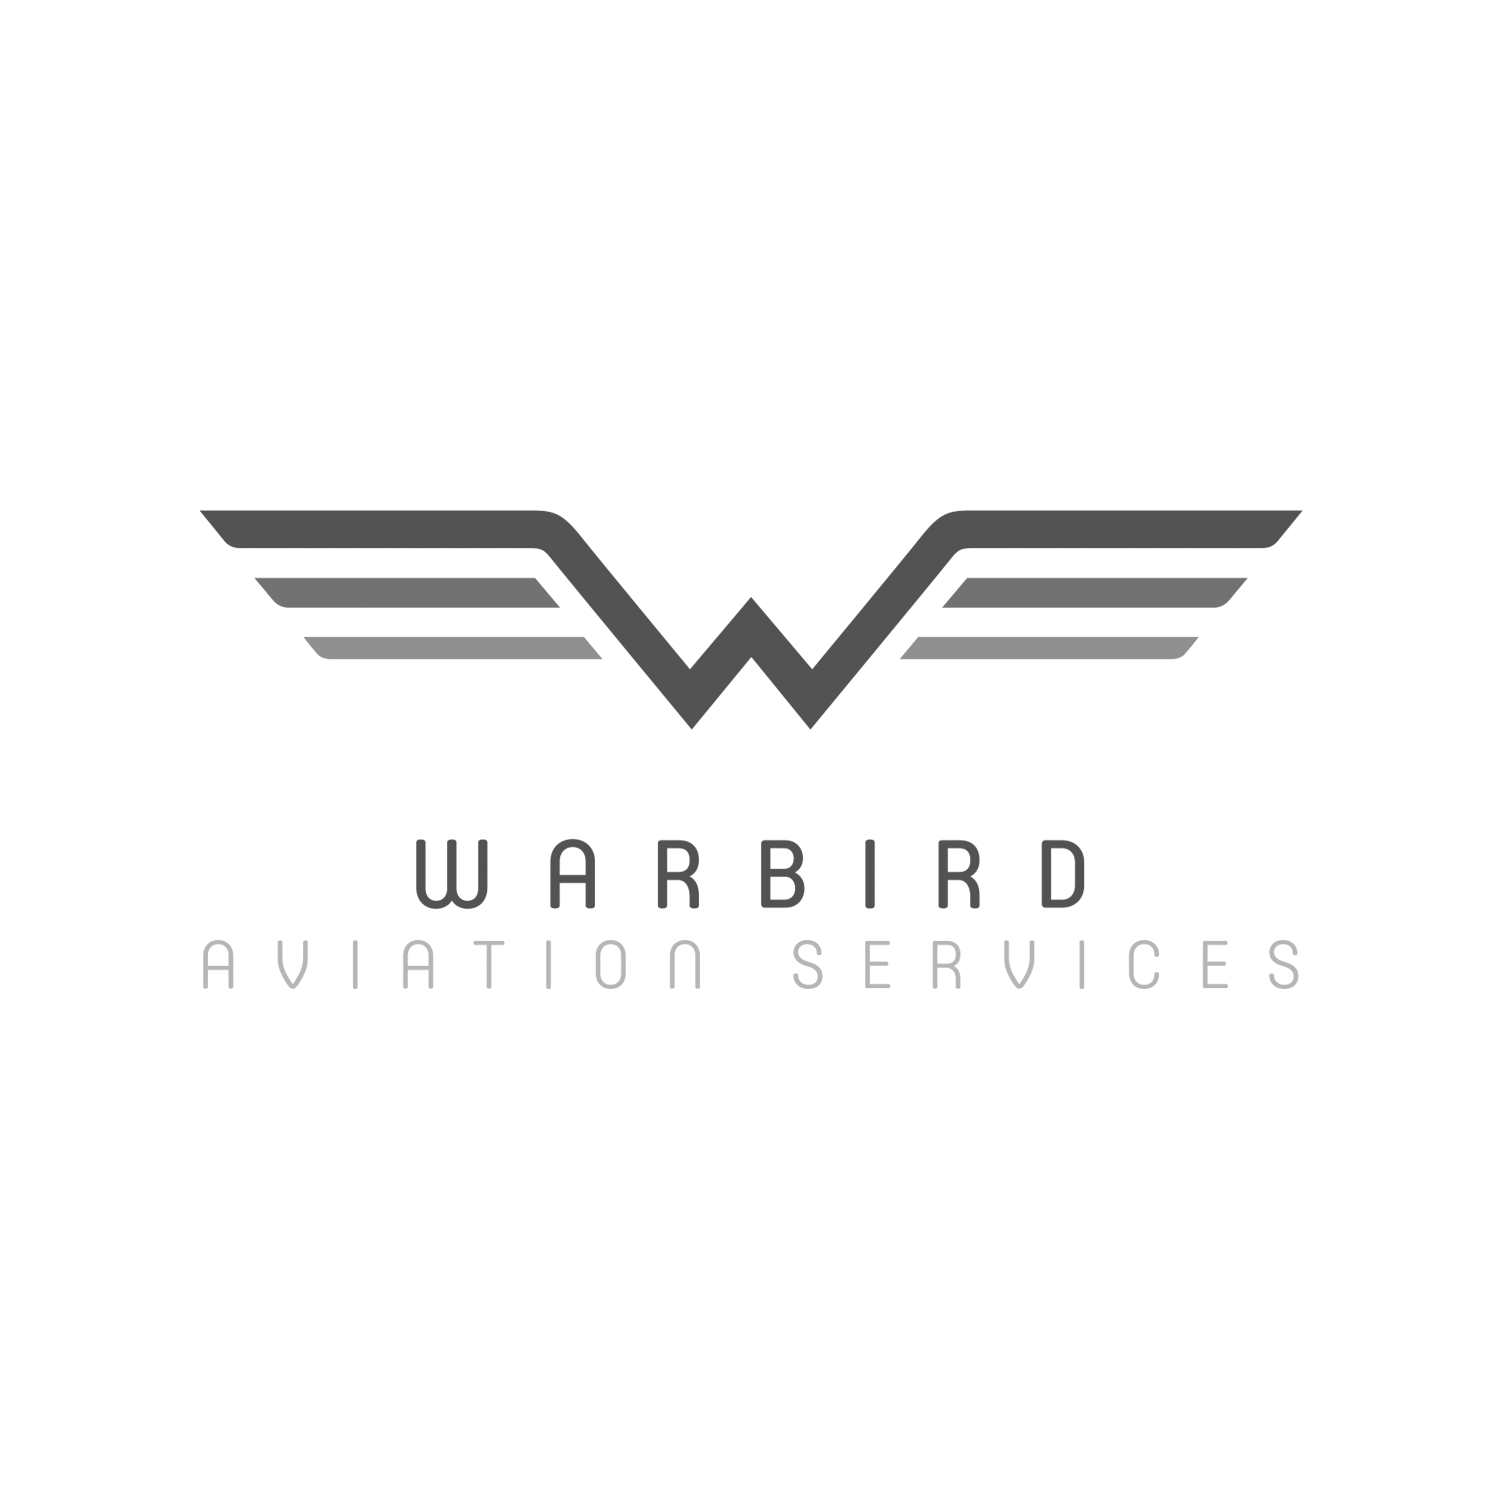 Parts Logo - Logo design for aviation services company, who build WWII aeroplane